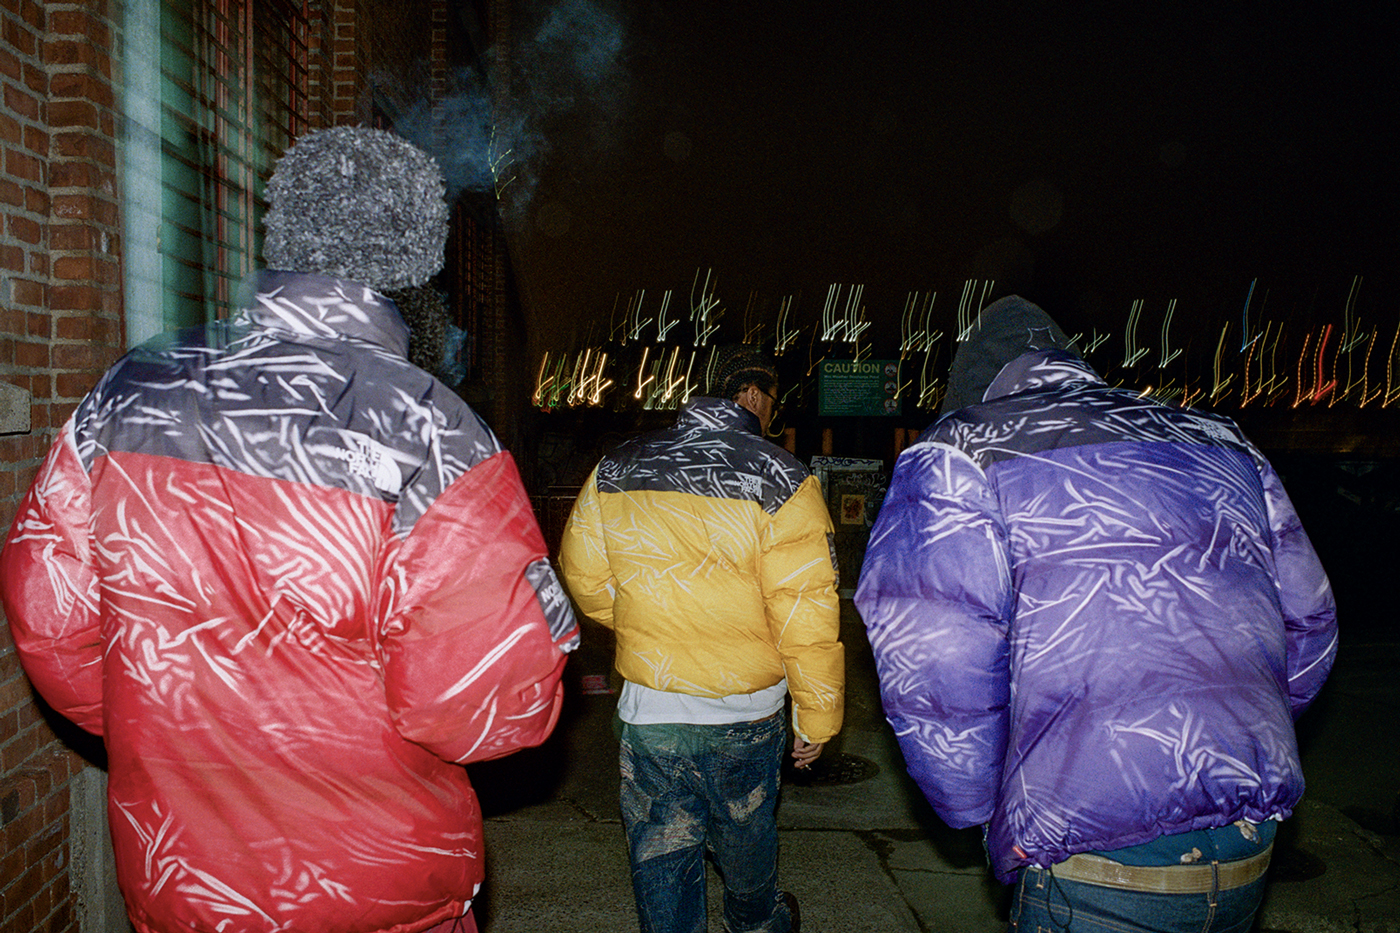 Supreme x The North Face Spring 2023